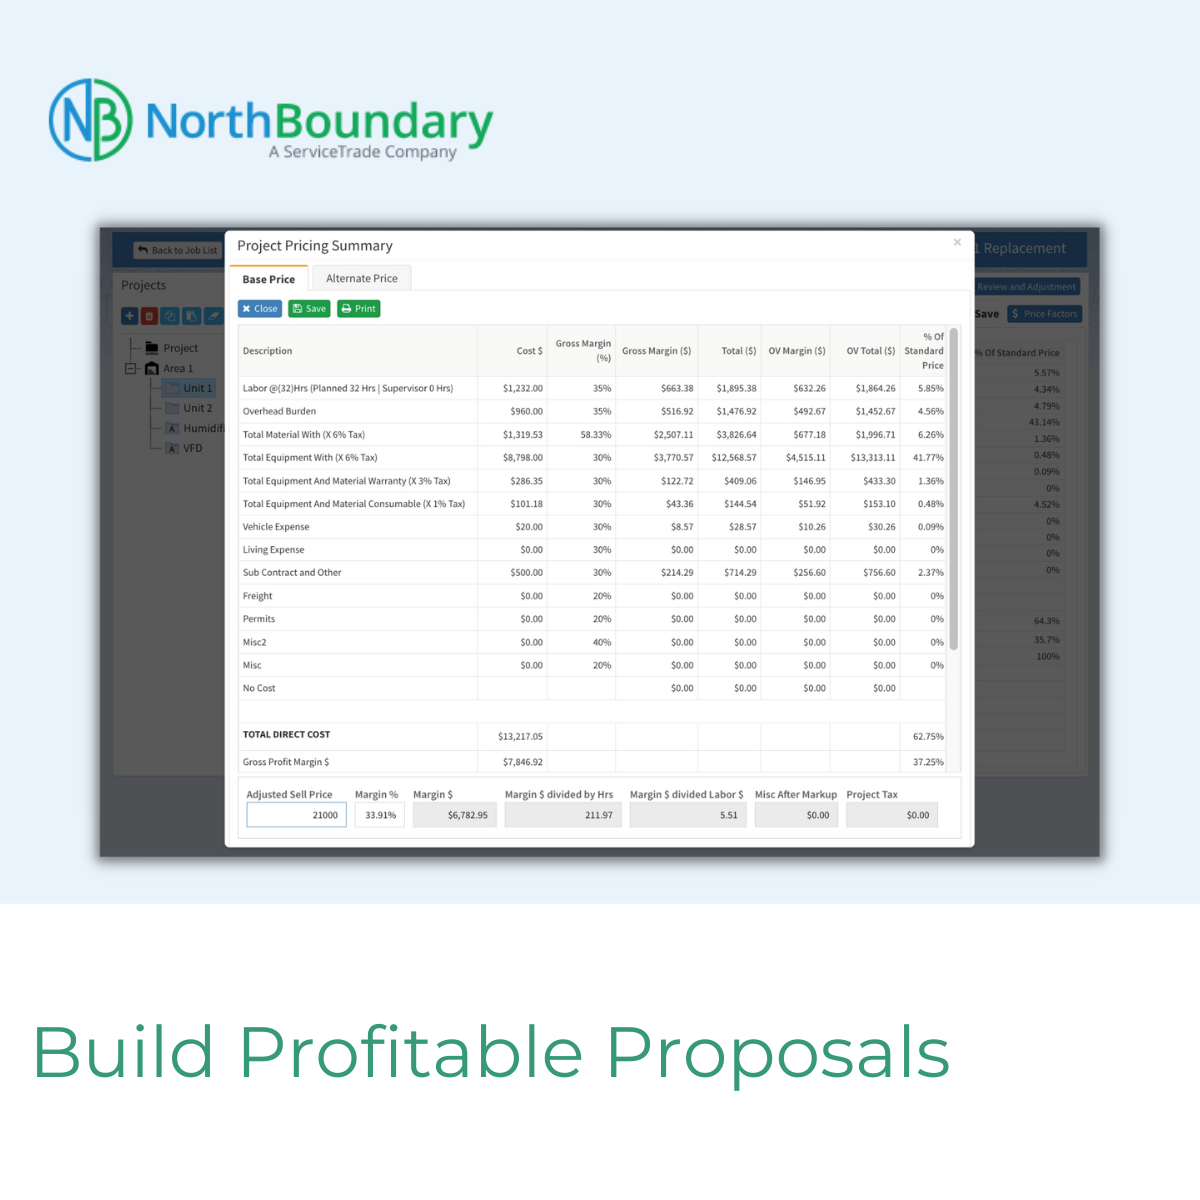 Apply pre-built or customizable pricing models to the customer’s equipment inventory to create contract pricing that meets your profit margin goals.